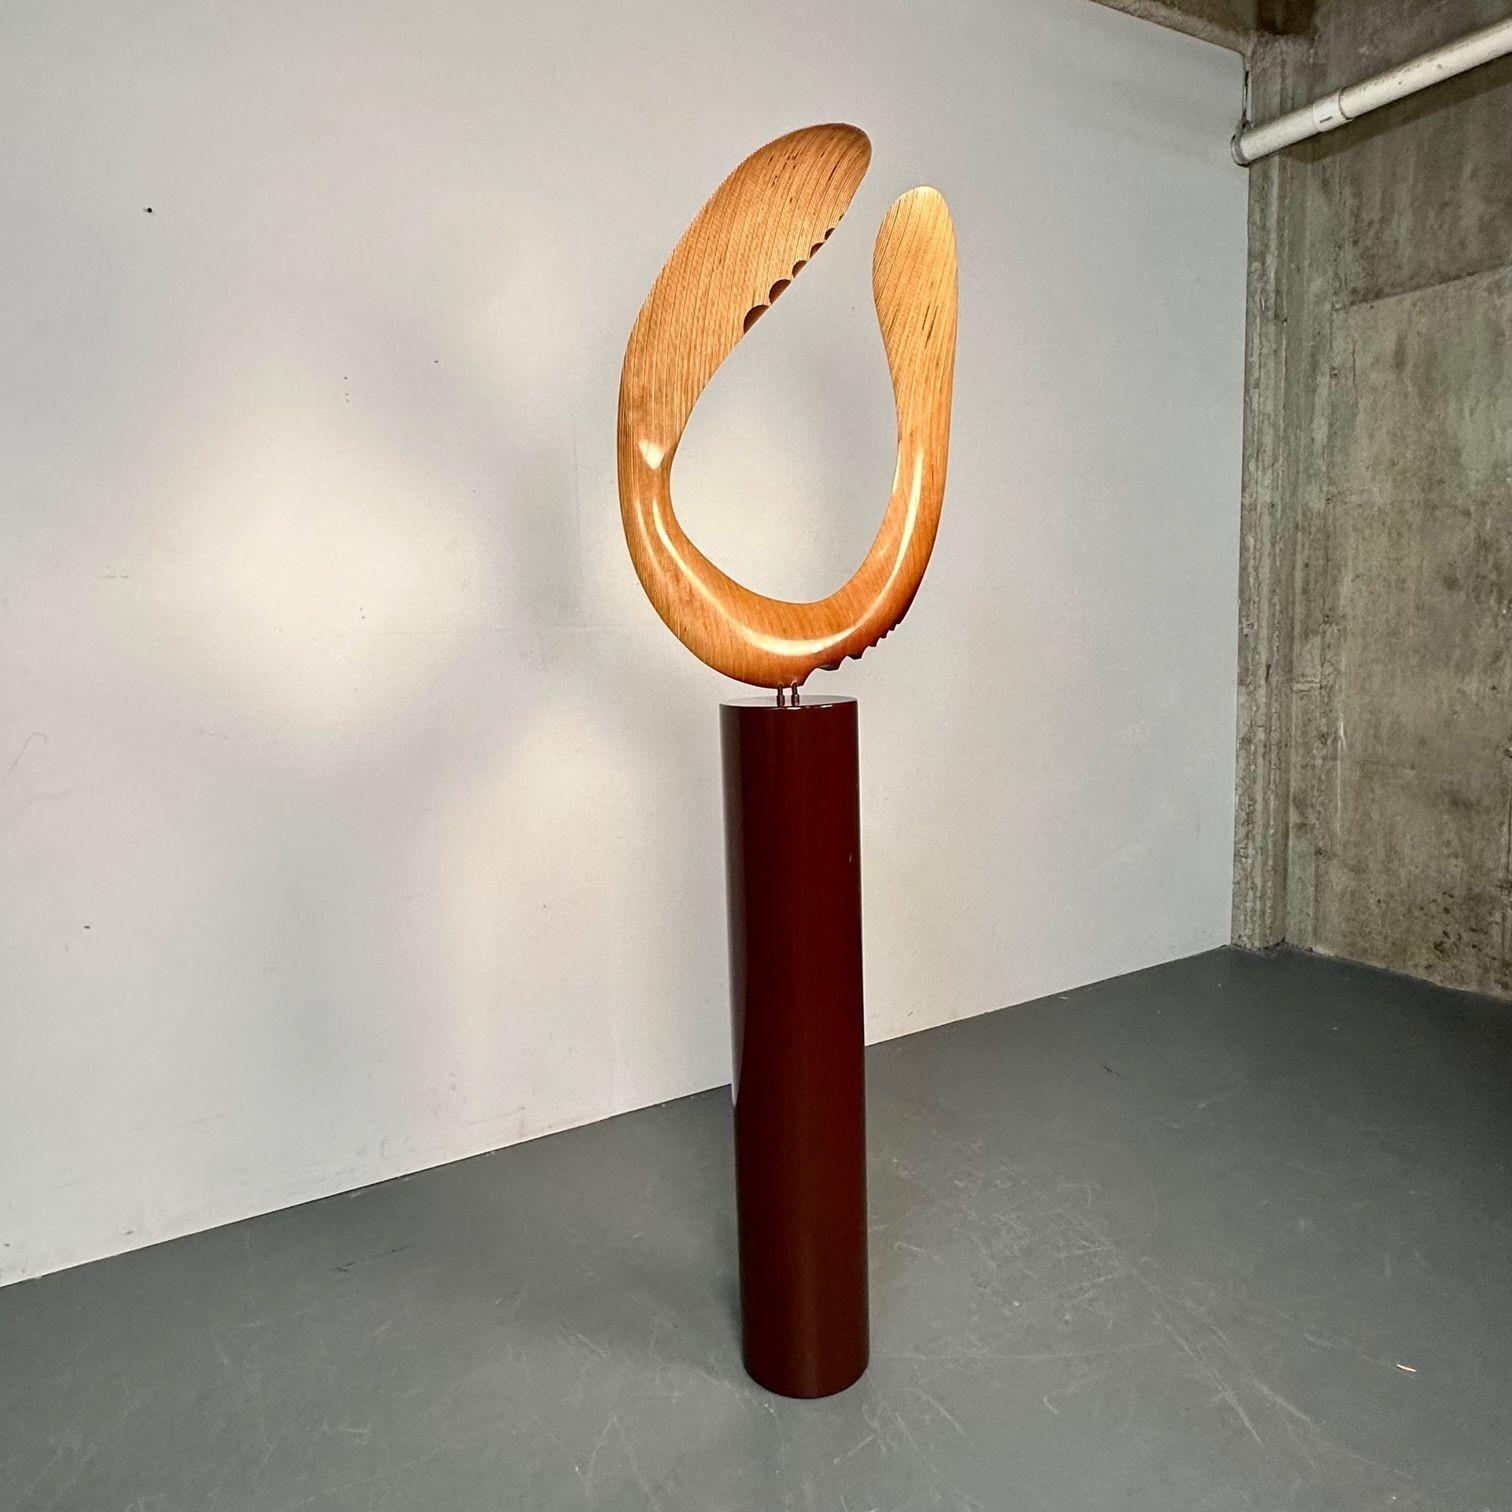  David Hymes, Contemporary, Boomerang Sculpture, Plywood, Steel Pedestal, 2010s For Sale 1